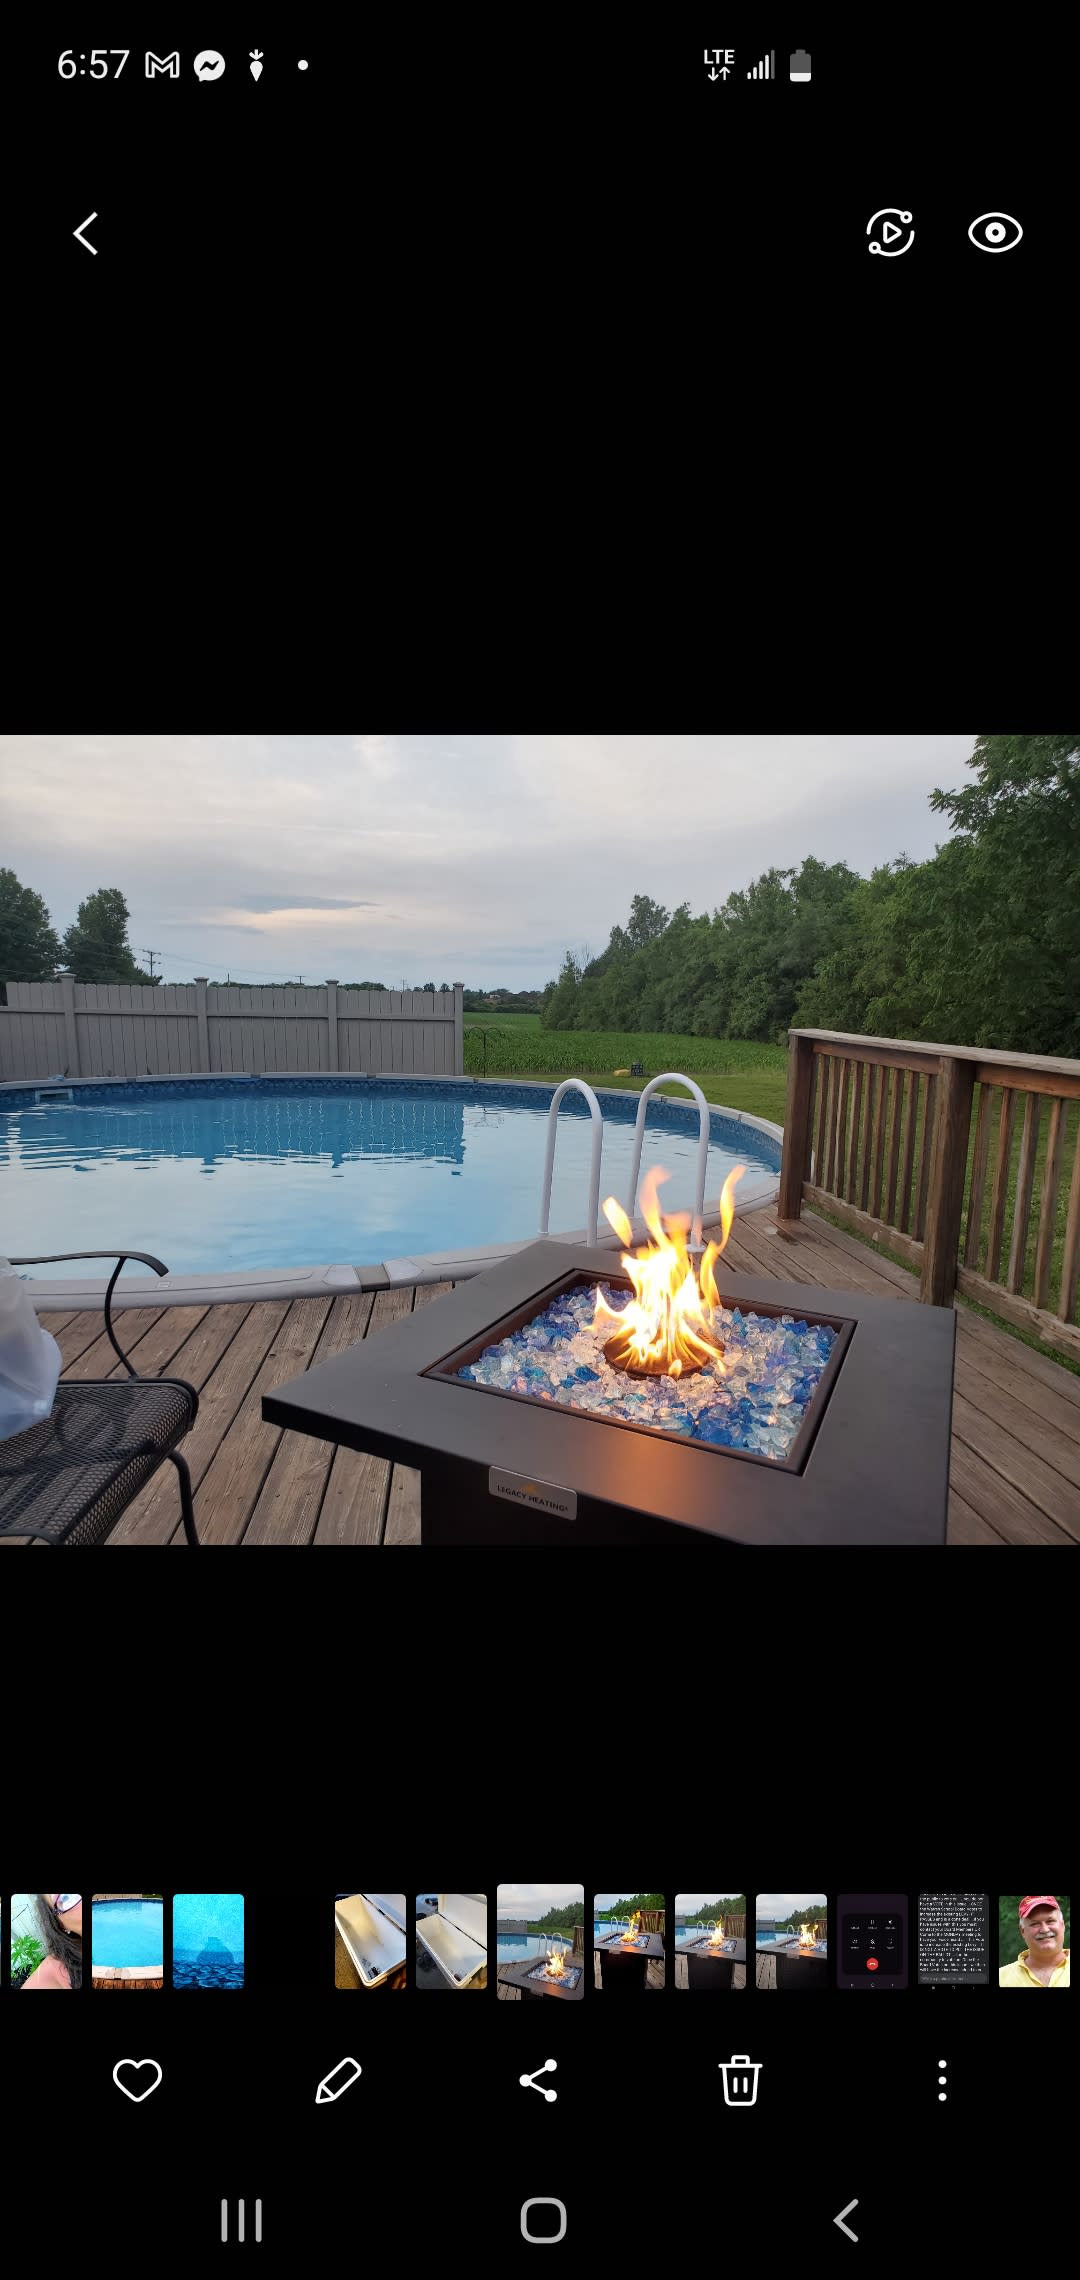 We have a huge deck with a pool. This is one of our 2 fire pits. This one is propane. The other is wood. 